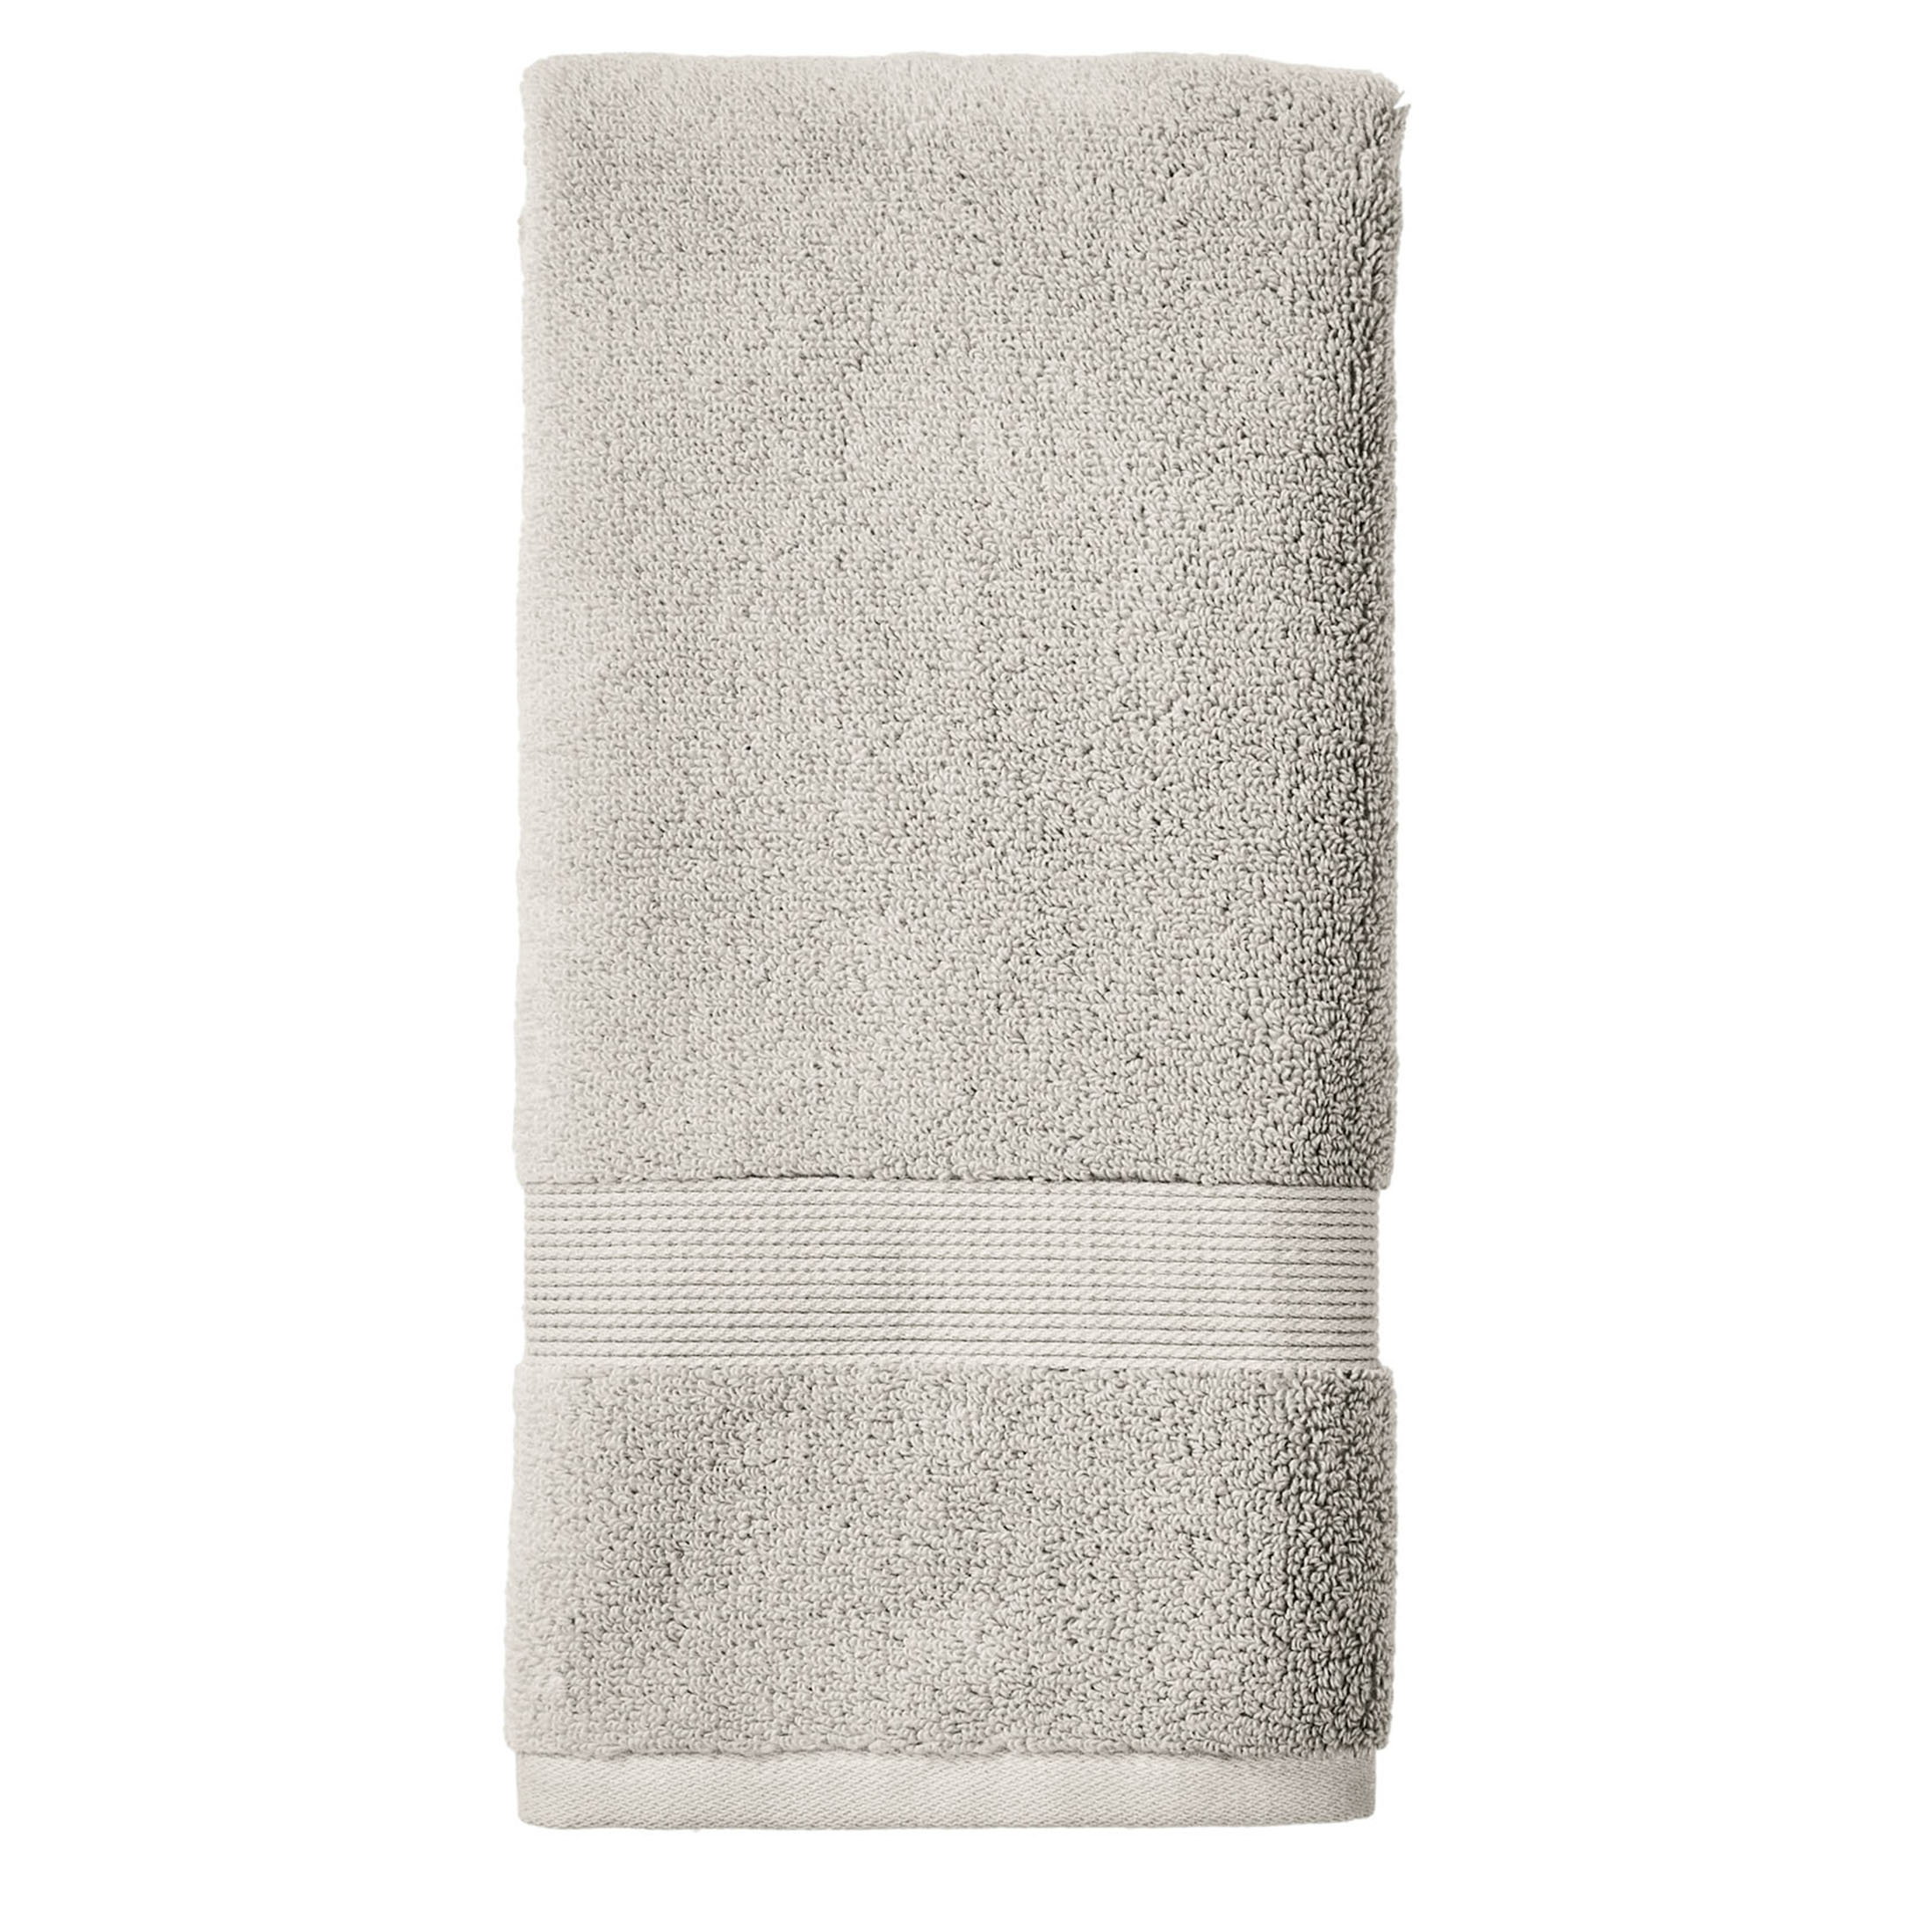 Better Homes & Gardens Signature Soft Hand Towel, Soft Silver - image 1 of 6